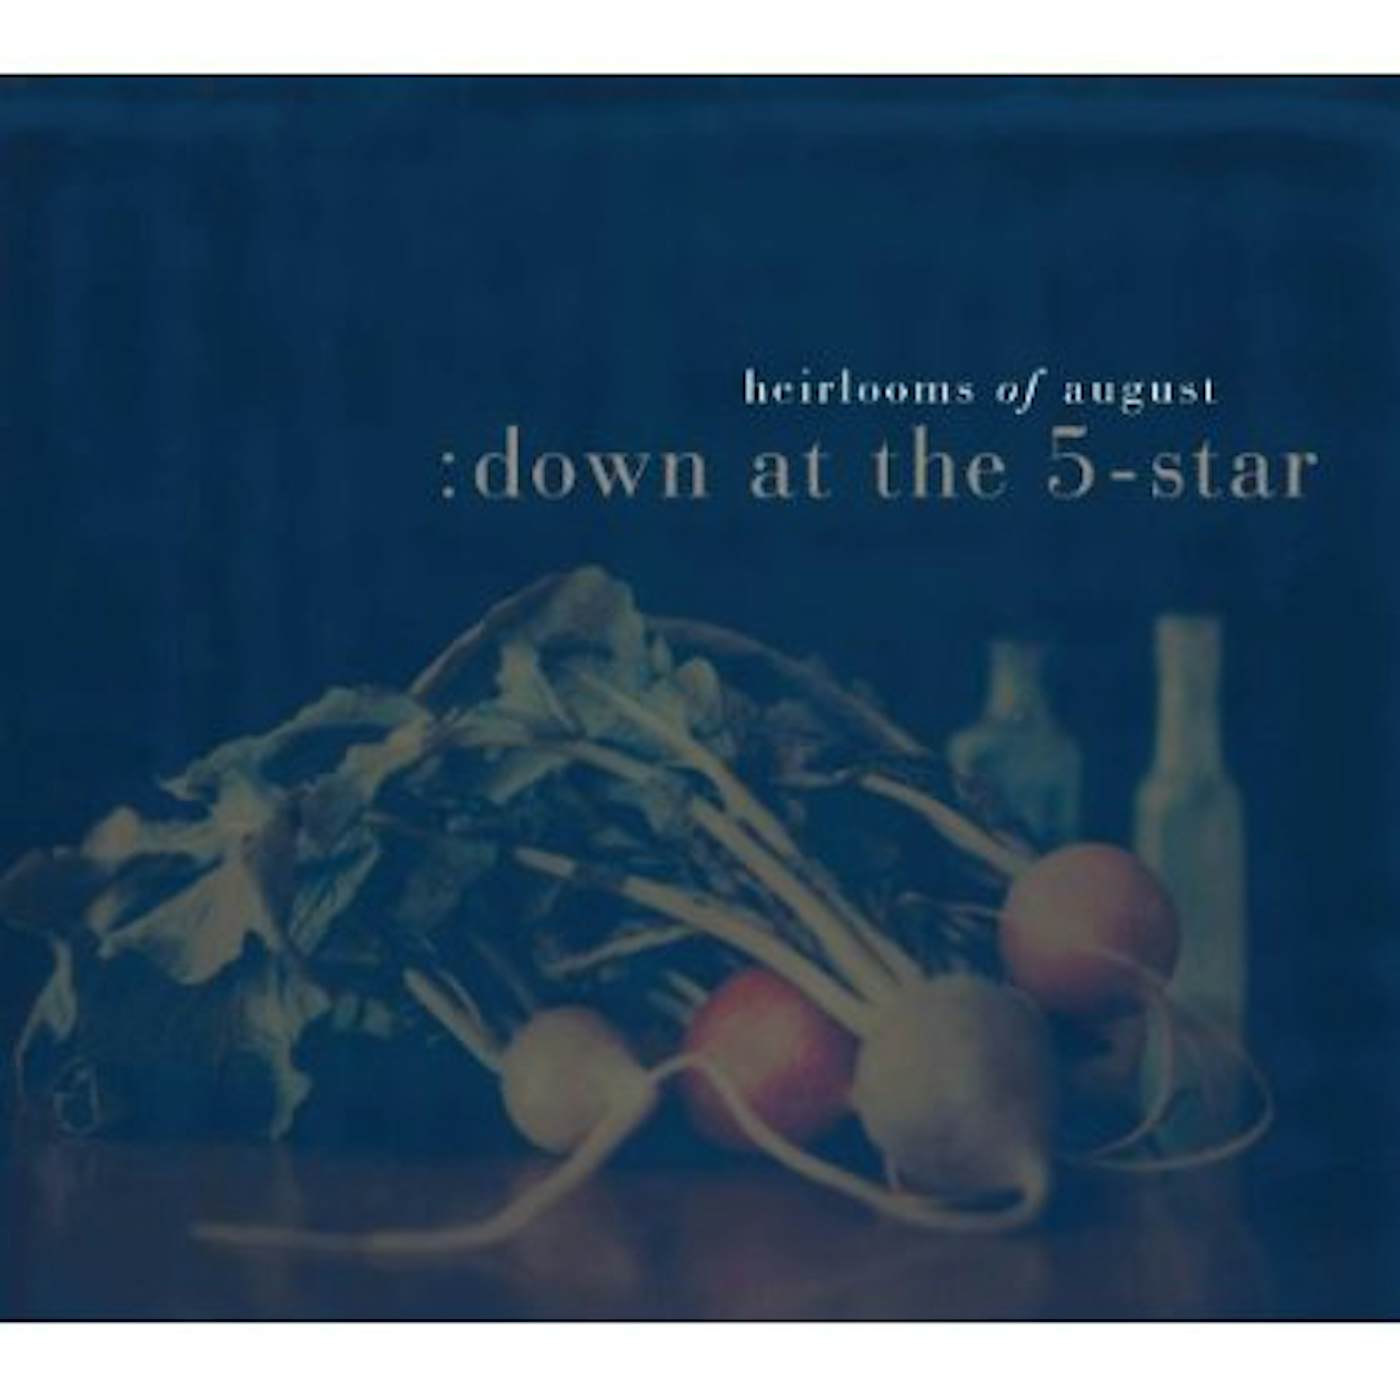 Heirlooms of August DOWN AT THE 5-STAR CD